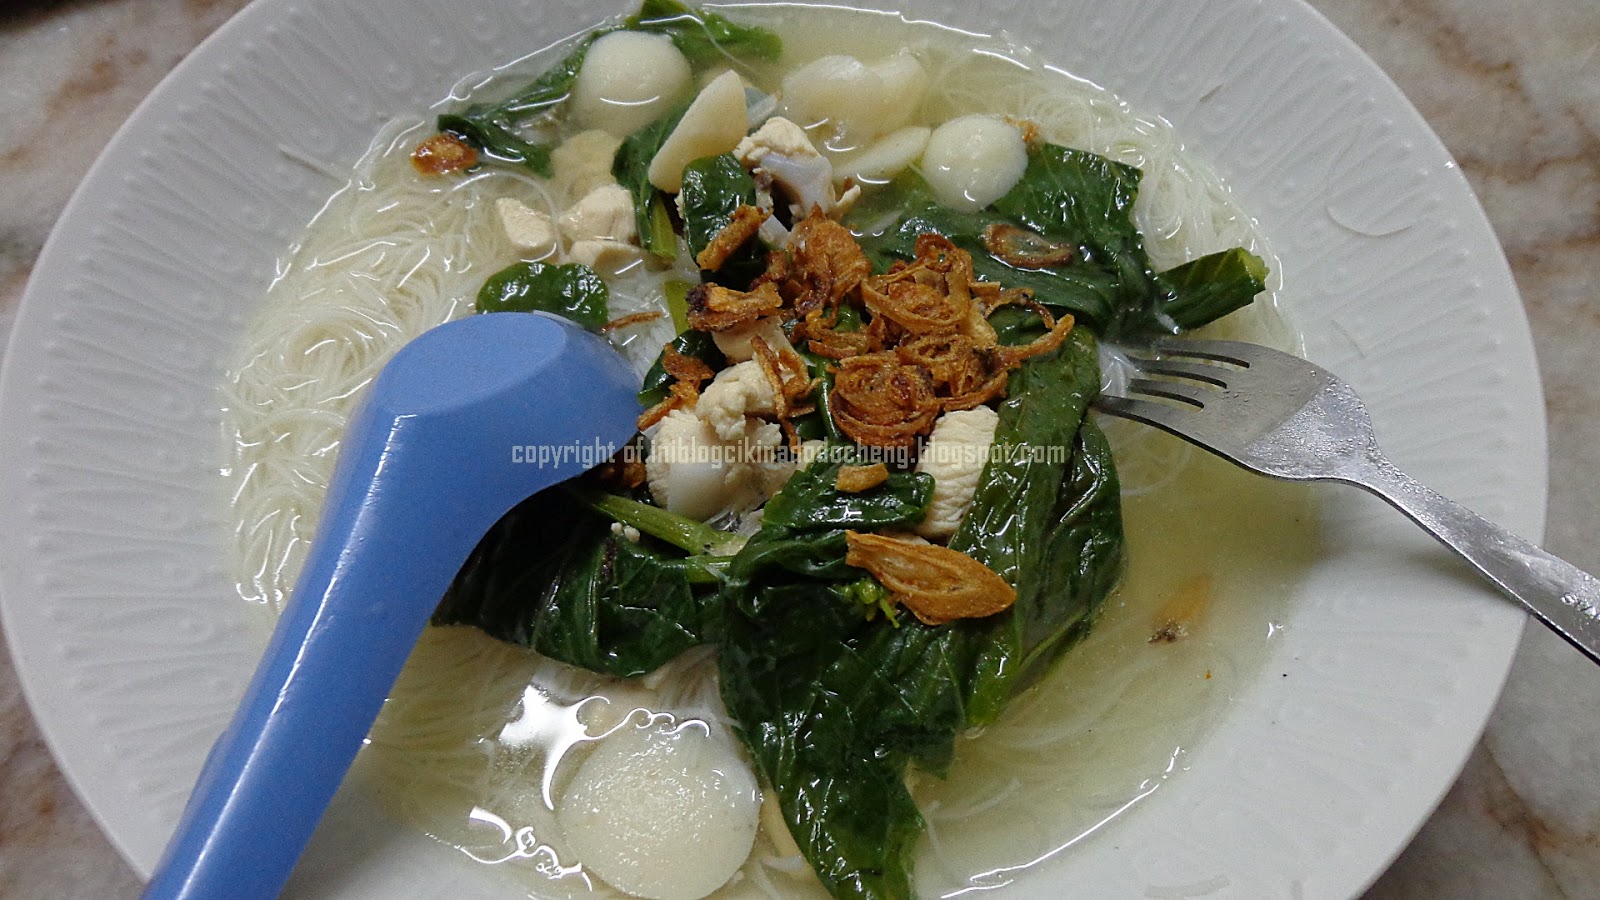 Open Minda: Resepi - Bihun sup Sytle Chinese { step by 